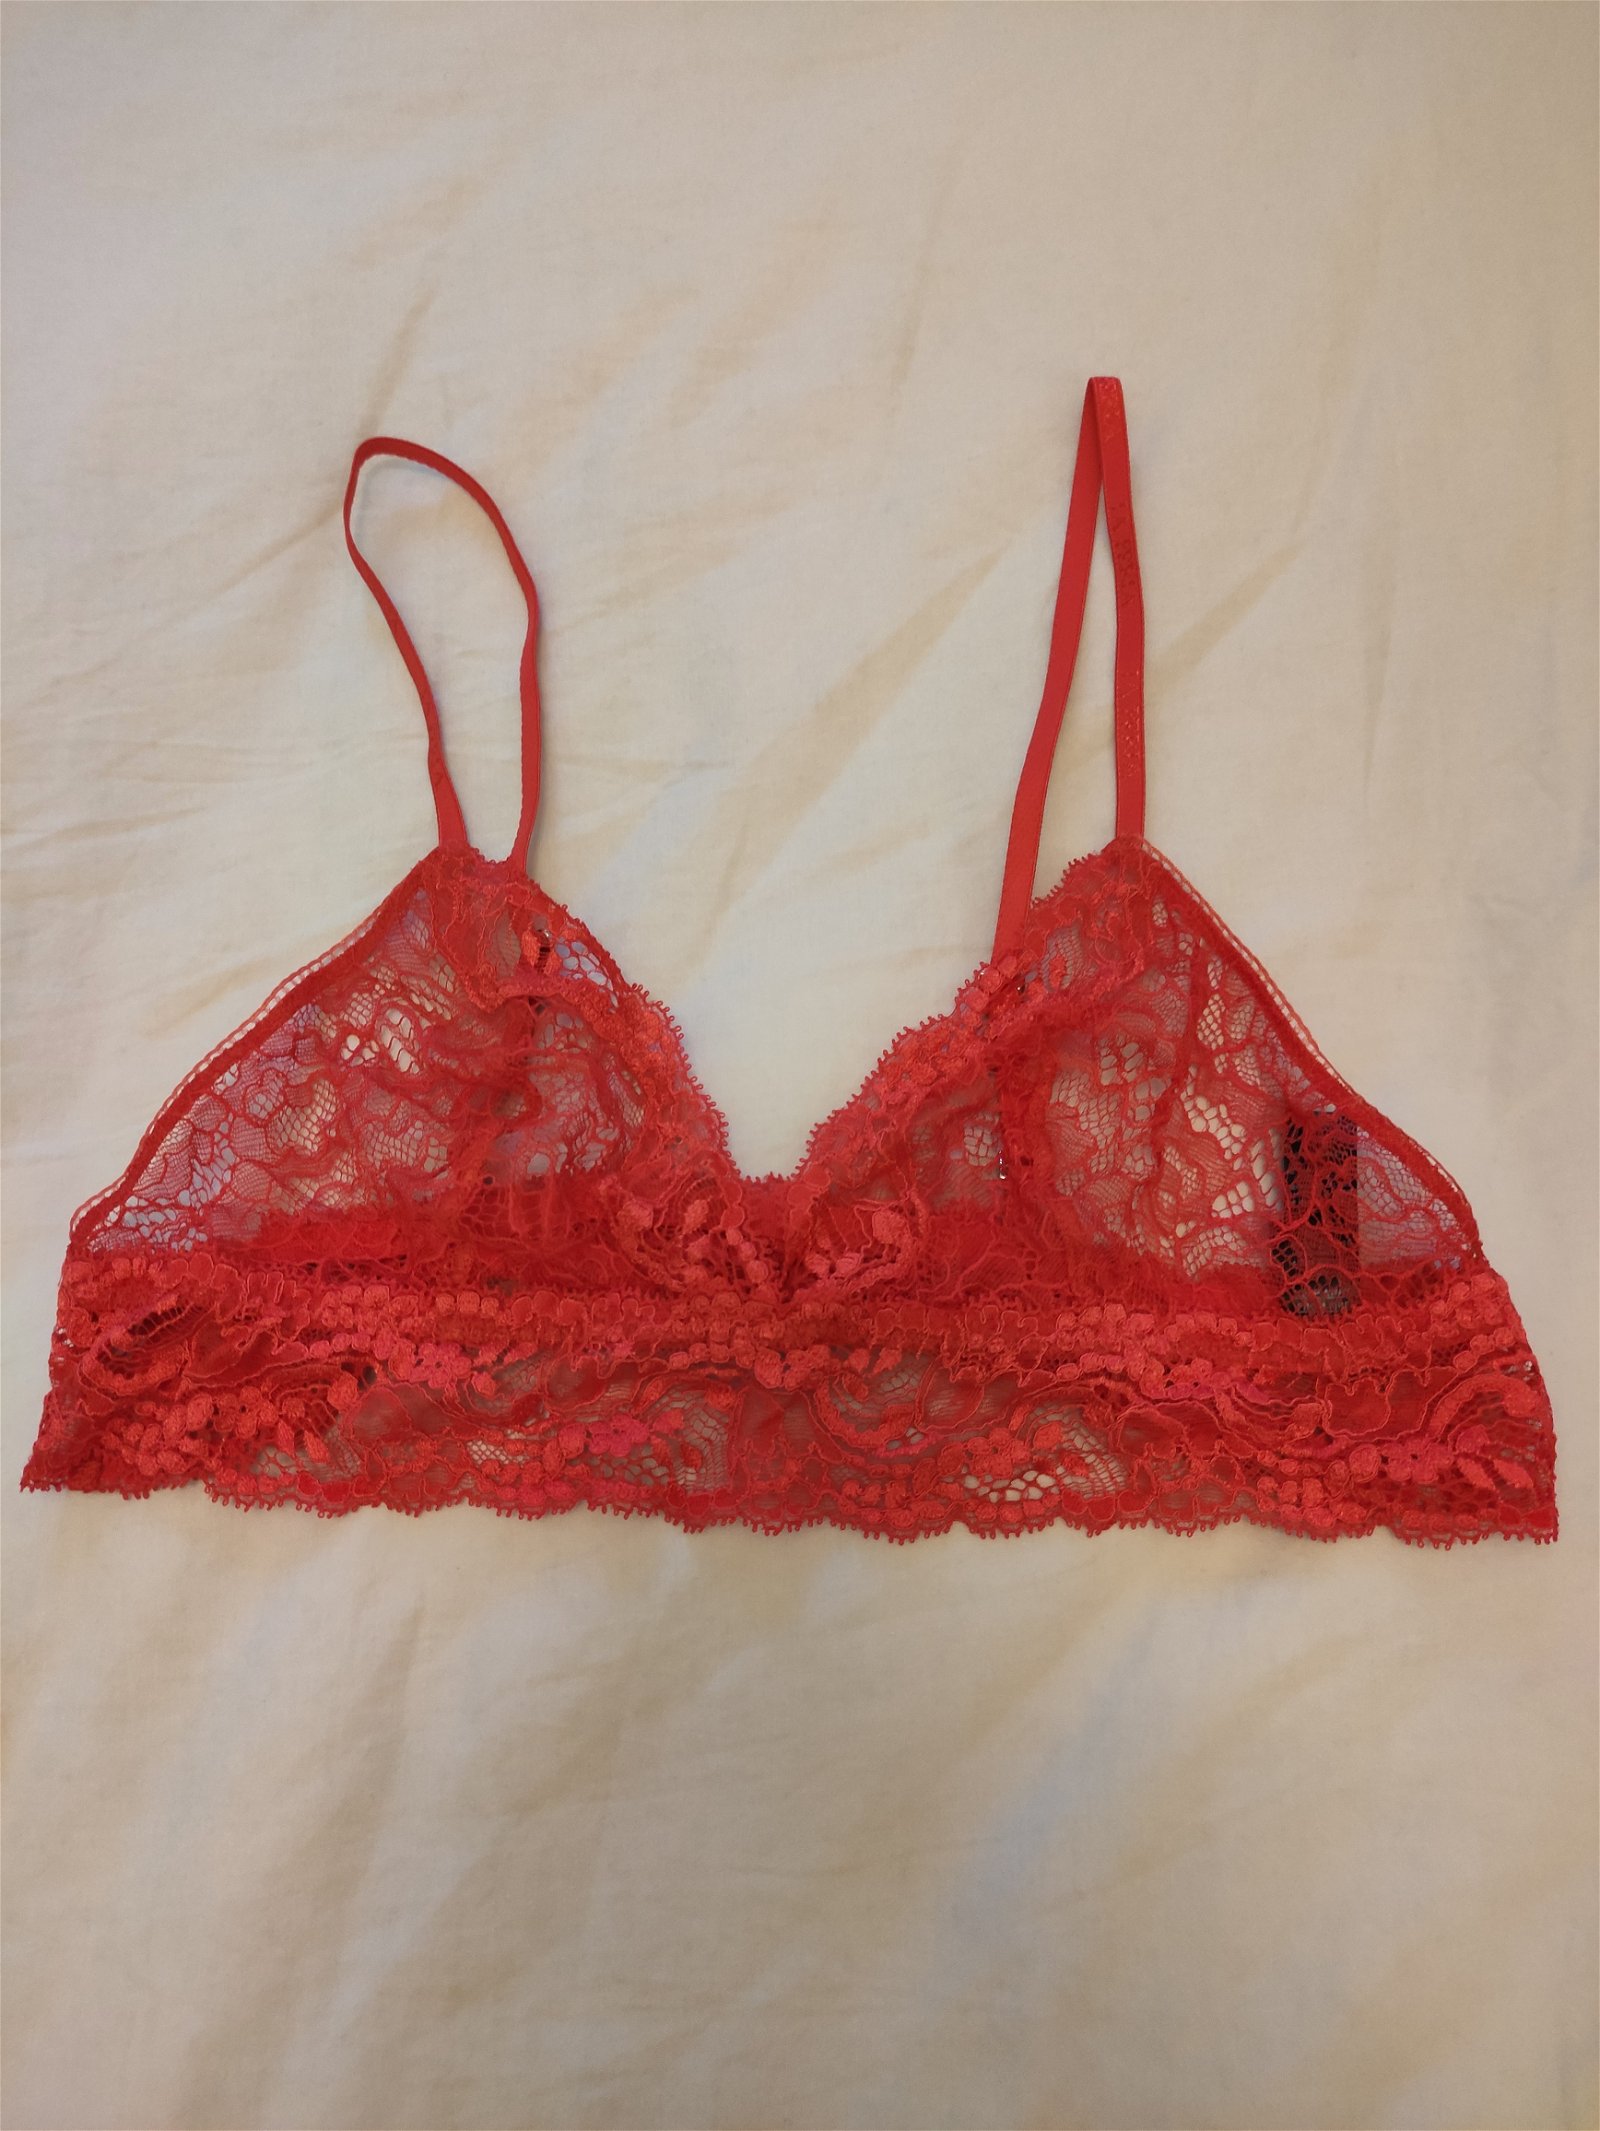 Photo by Puppamelo with the username @Puppamelo,  December 31, 2020 at 7:54 AM. The post is about the topic Bra/Panty/Lingerie/Bikini